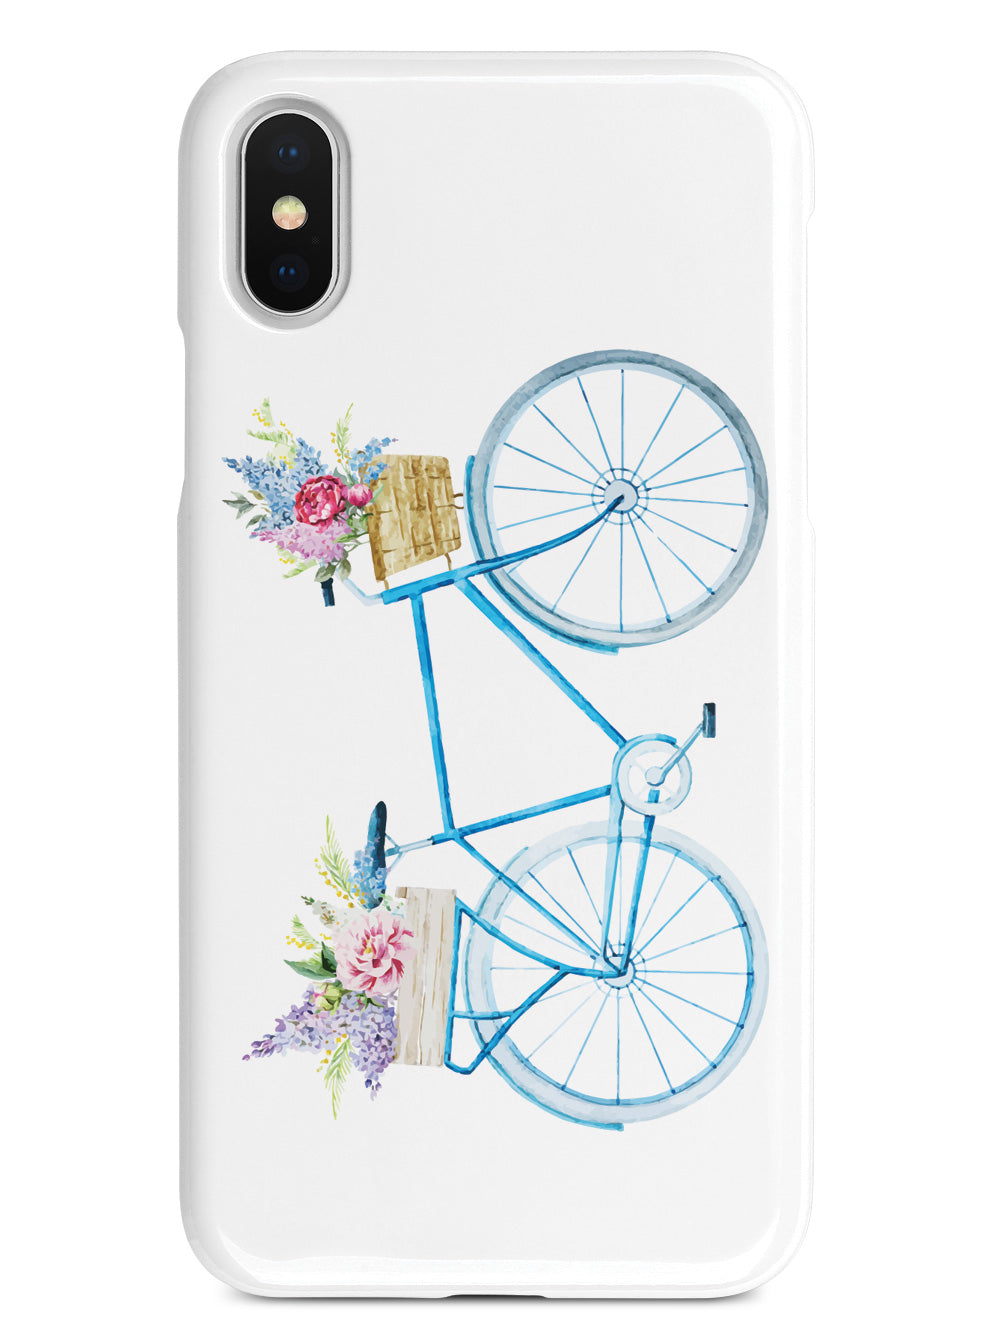 Basket of Flowers - Blue Bicycle - White Case